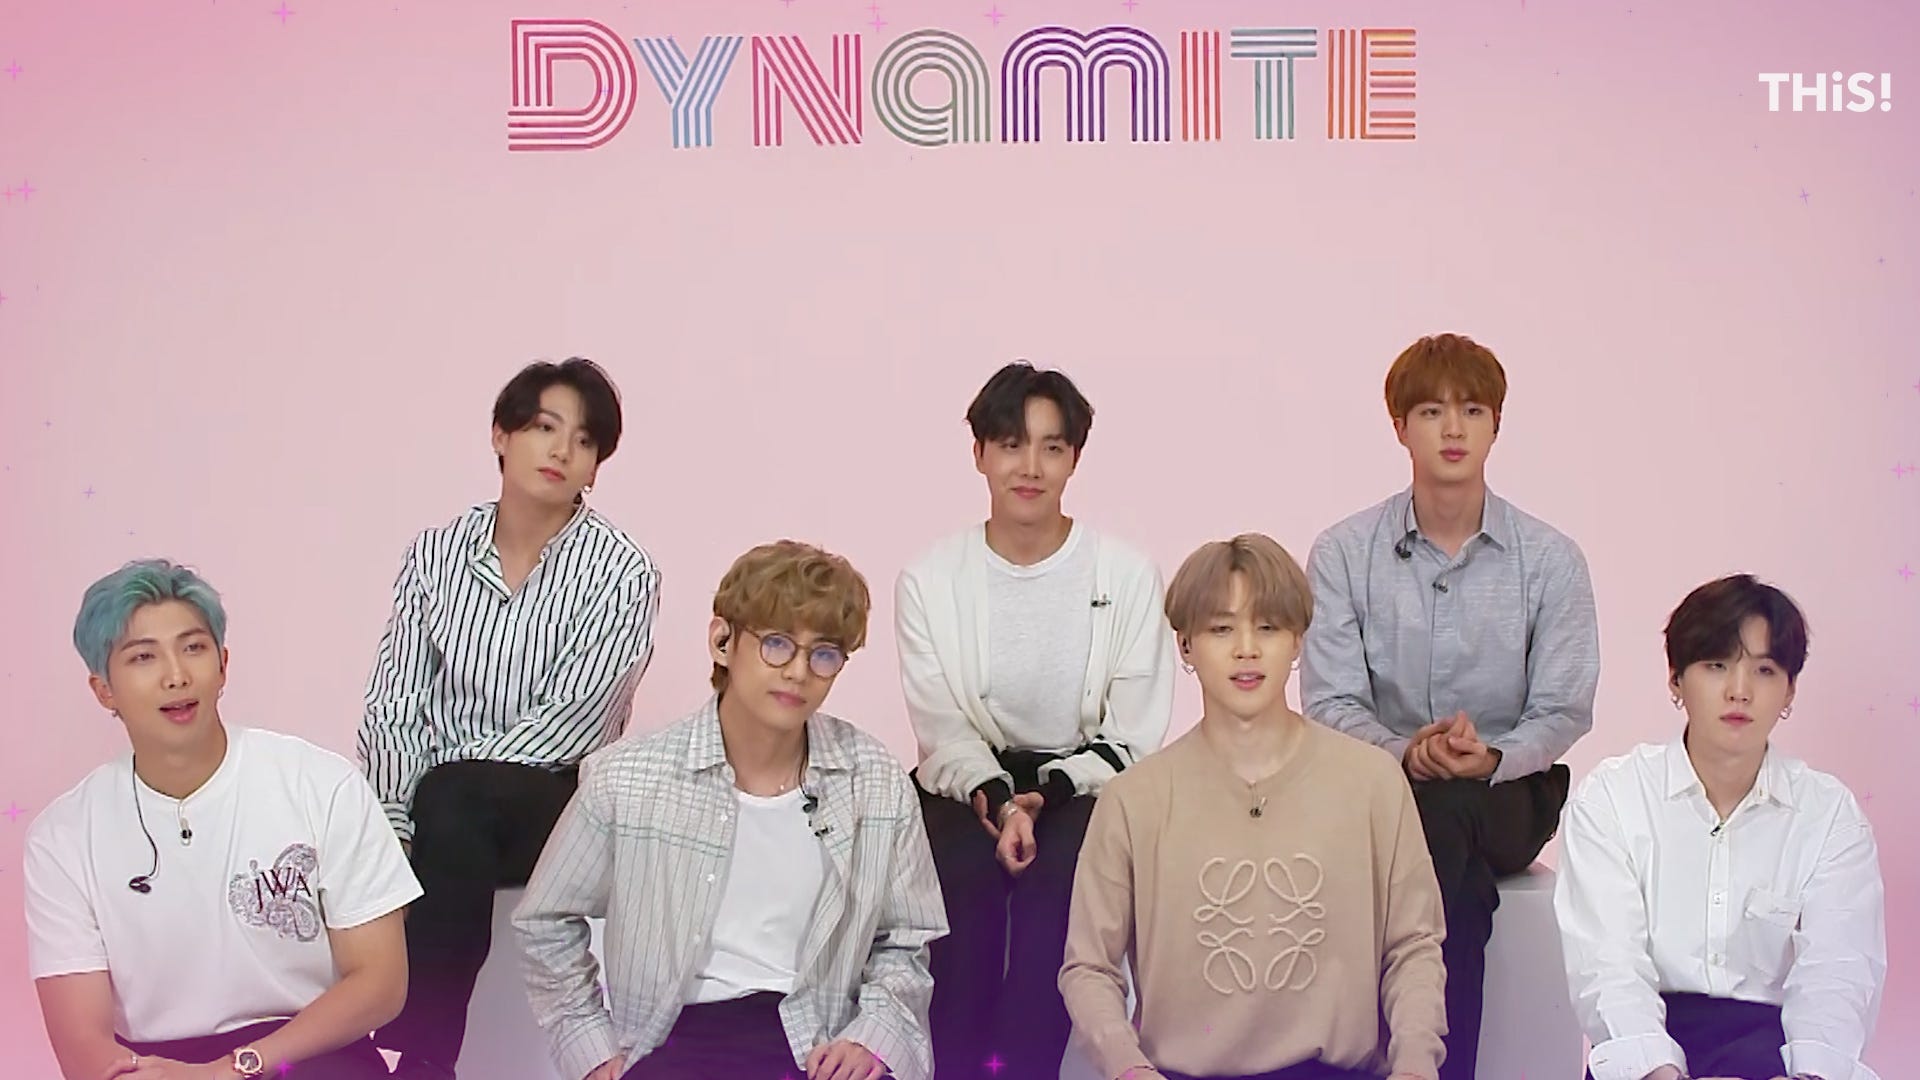 BTS new song 'Dynamite' praised by critics as 'upbeat': Review roundup